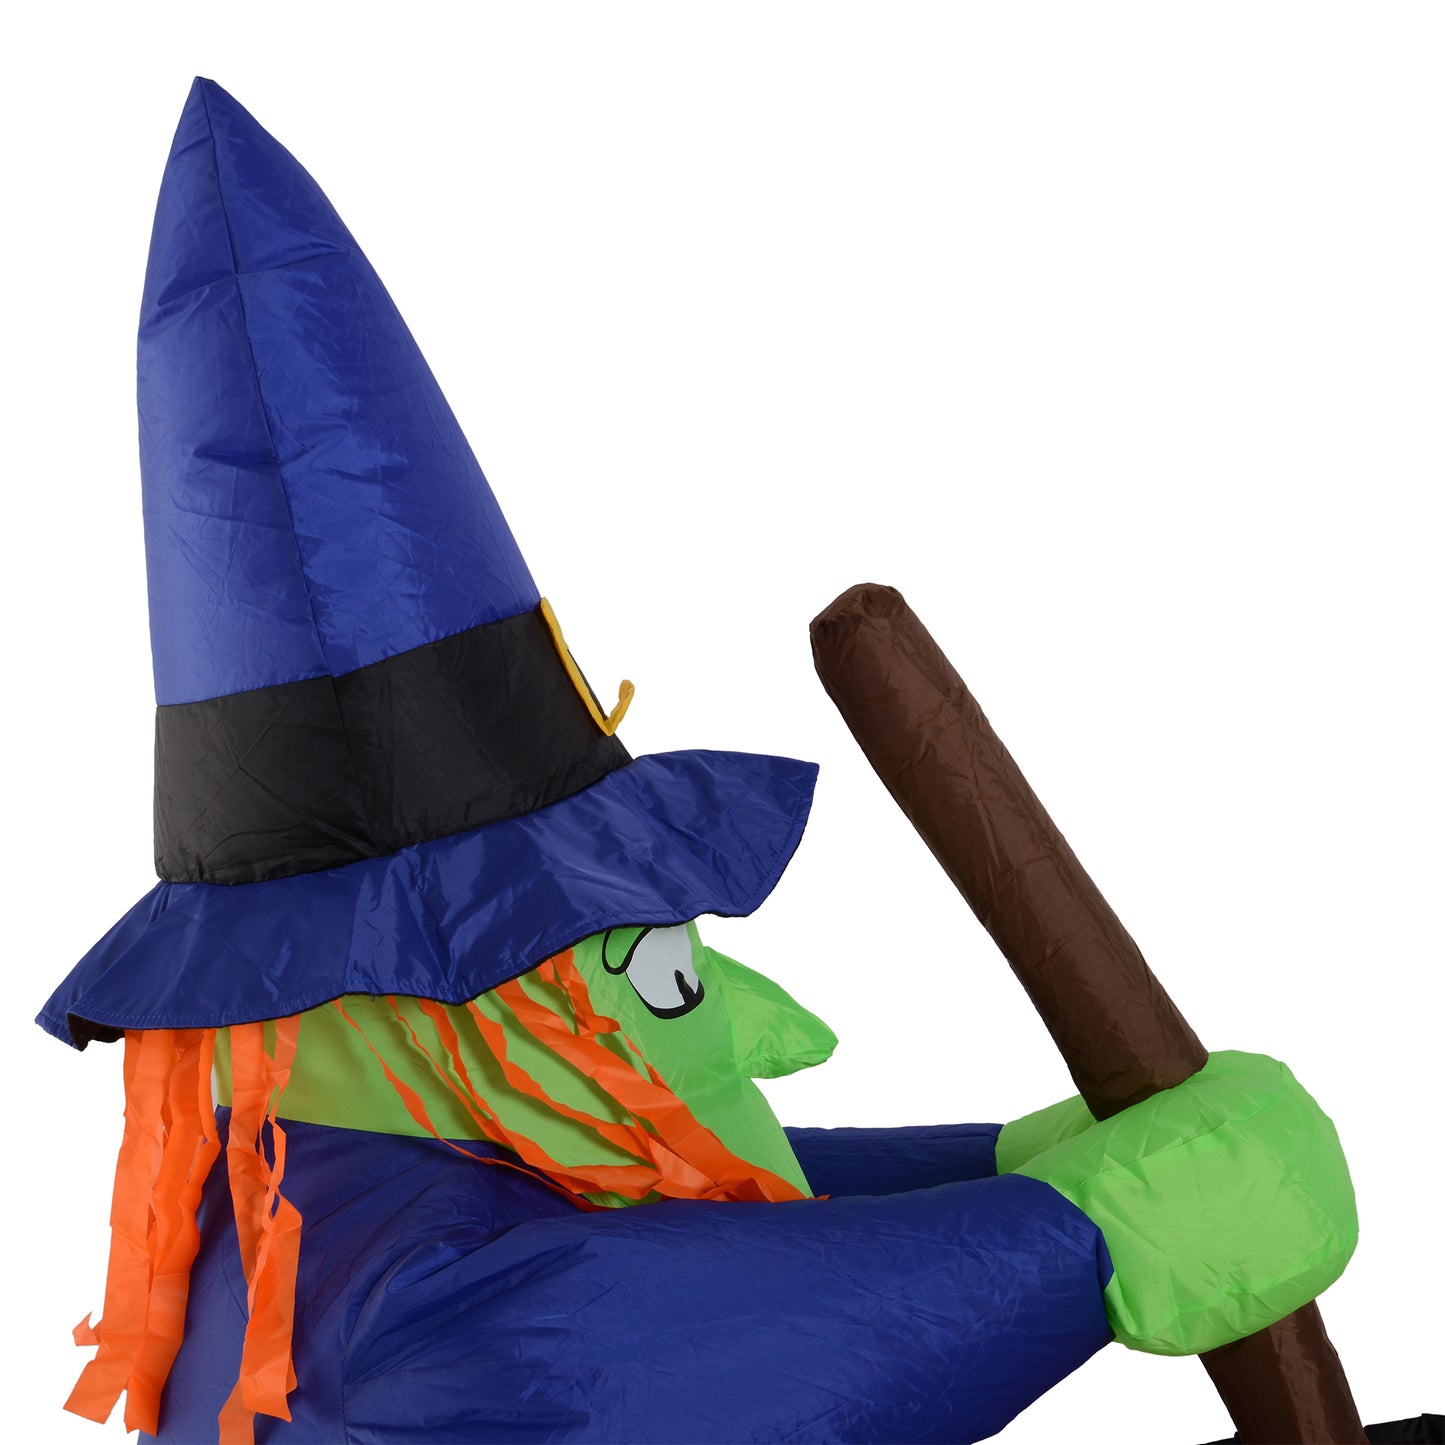 HOMCOM 1.8H m Inflatable Witches Halloween Decoration, Polyester Fabric-Multicolour